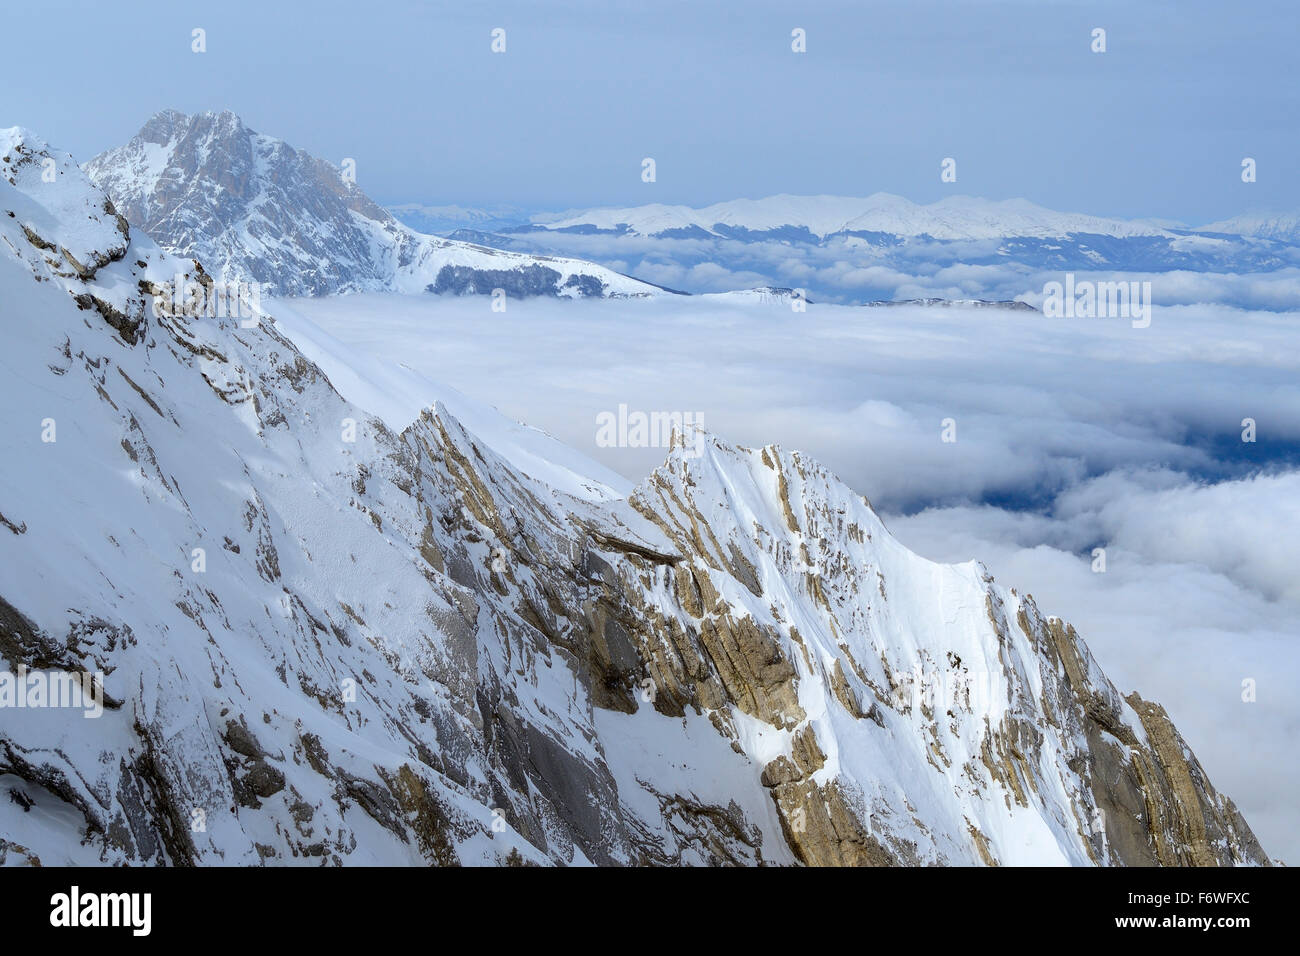 Gran Sasso standing above the snow-covered face of Monte Camicia, back-country skiing, Monte Camiscia, Val Vradda, Gran Sasso, C Stock Photo